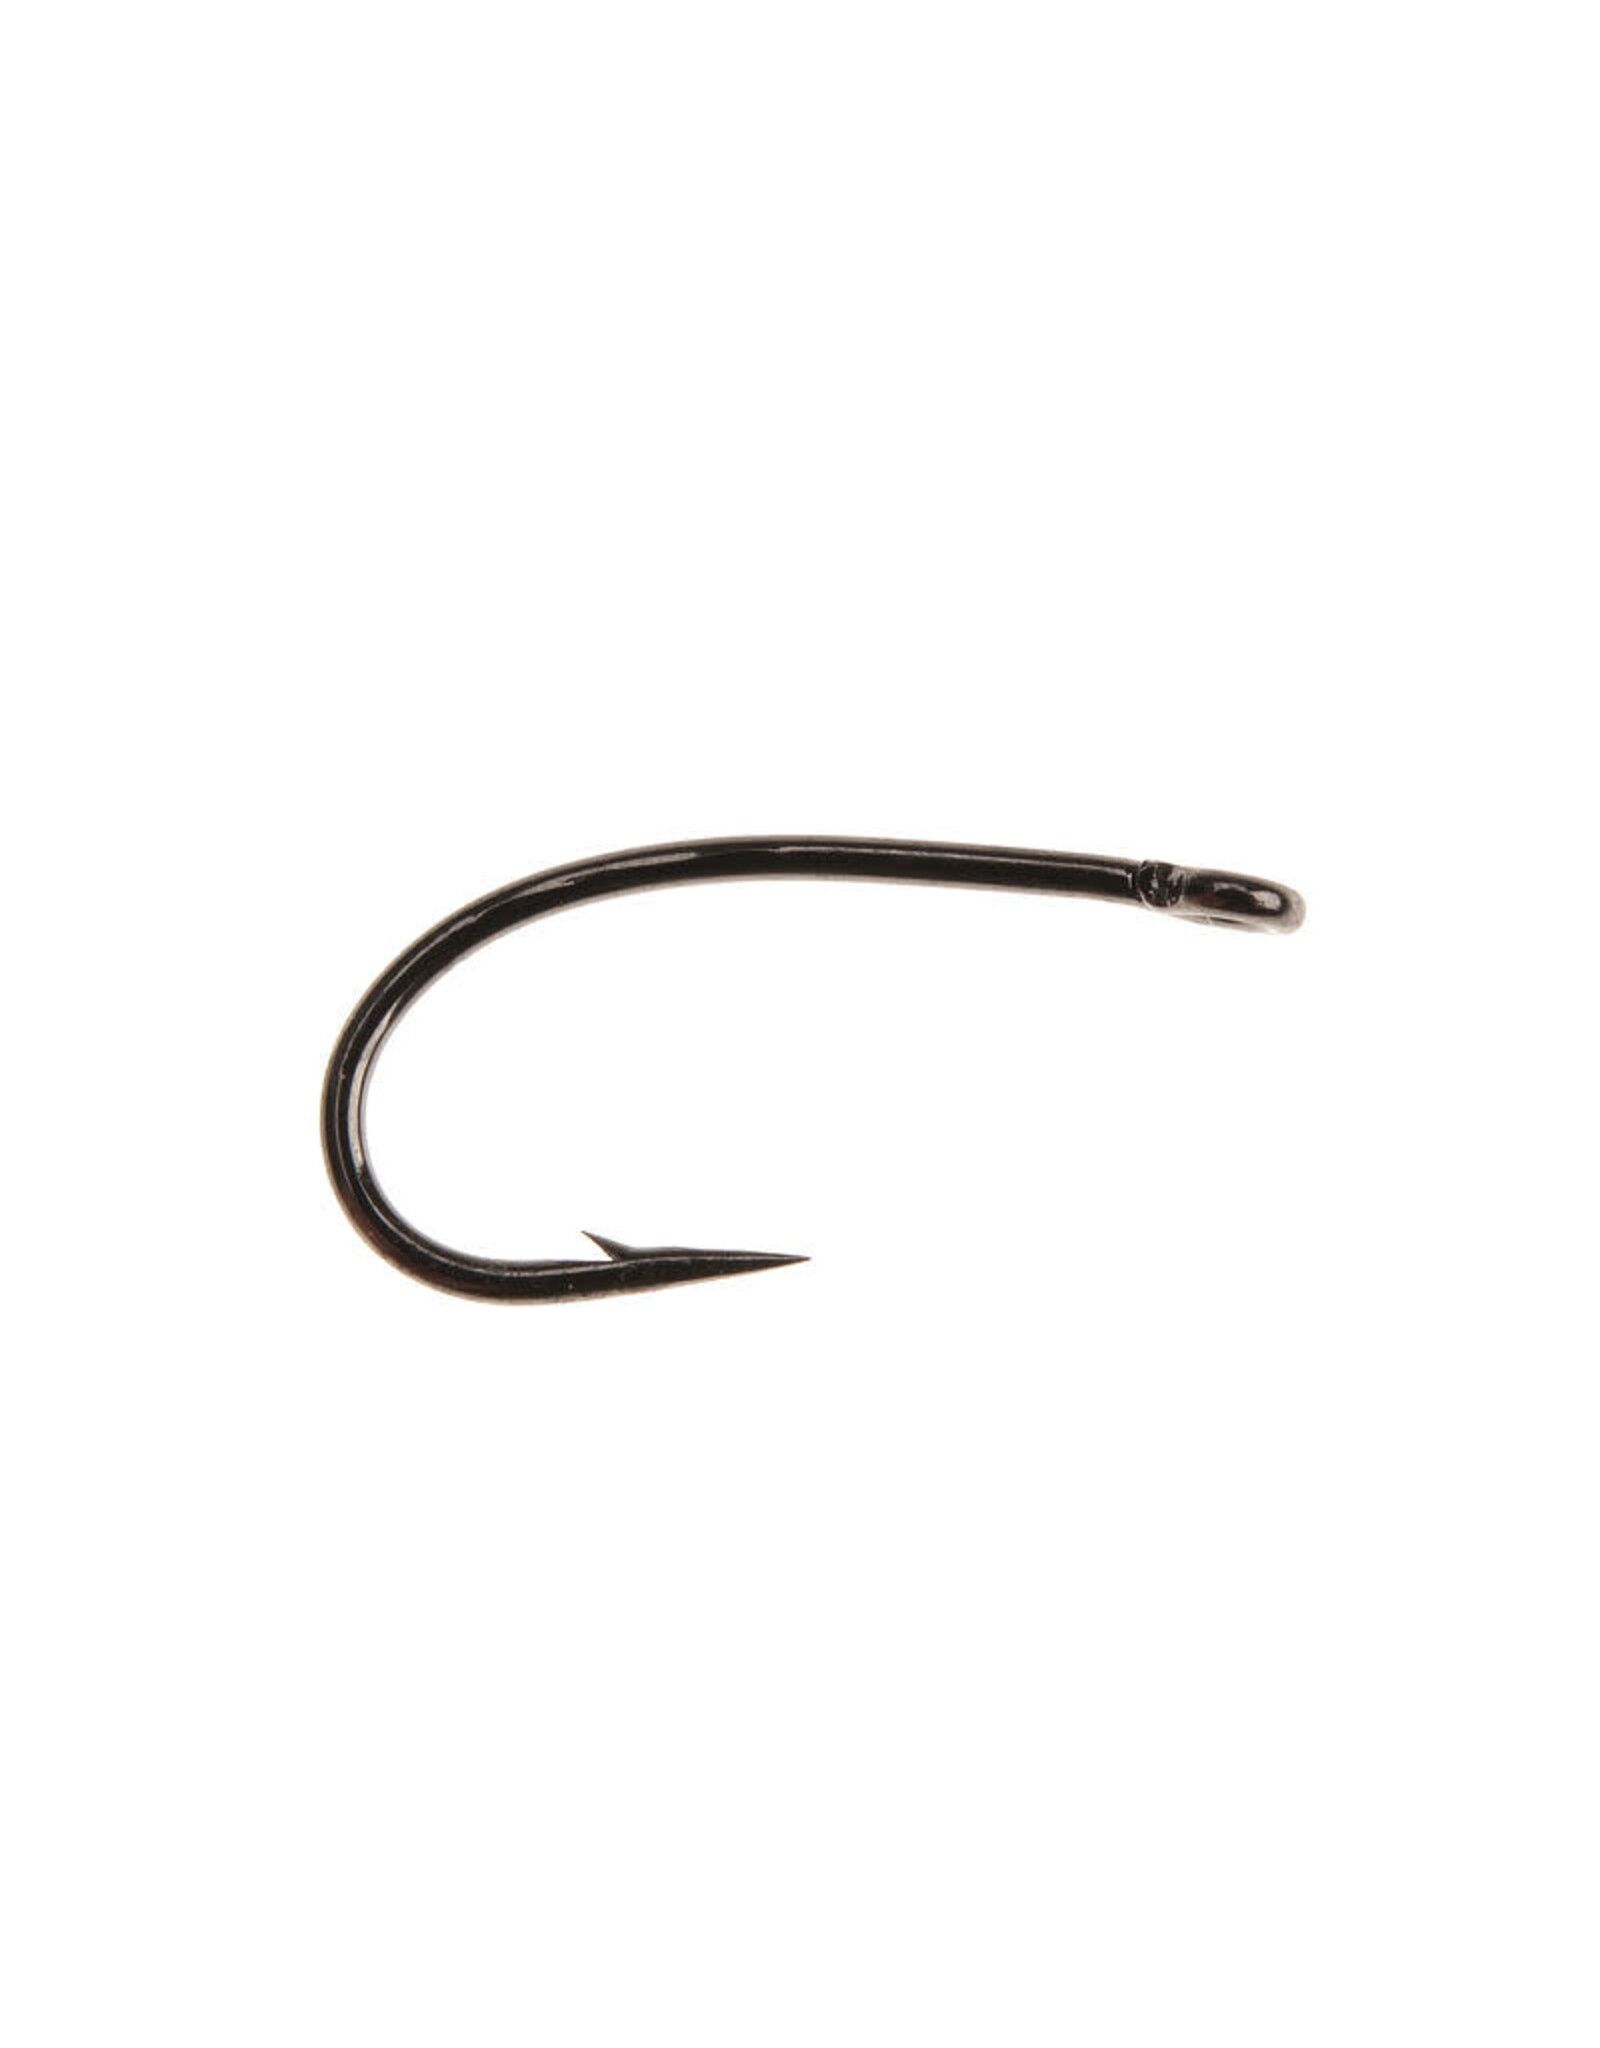 AHREX Ahrex FW 510 Curved Dry Hook Barbed